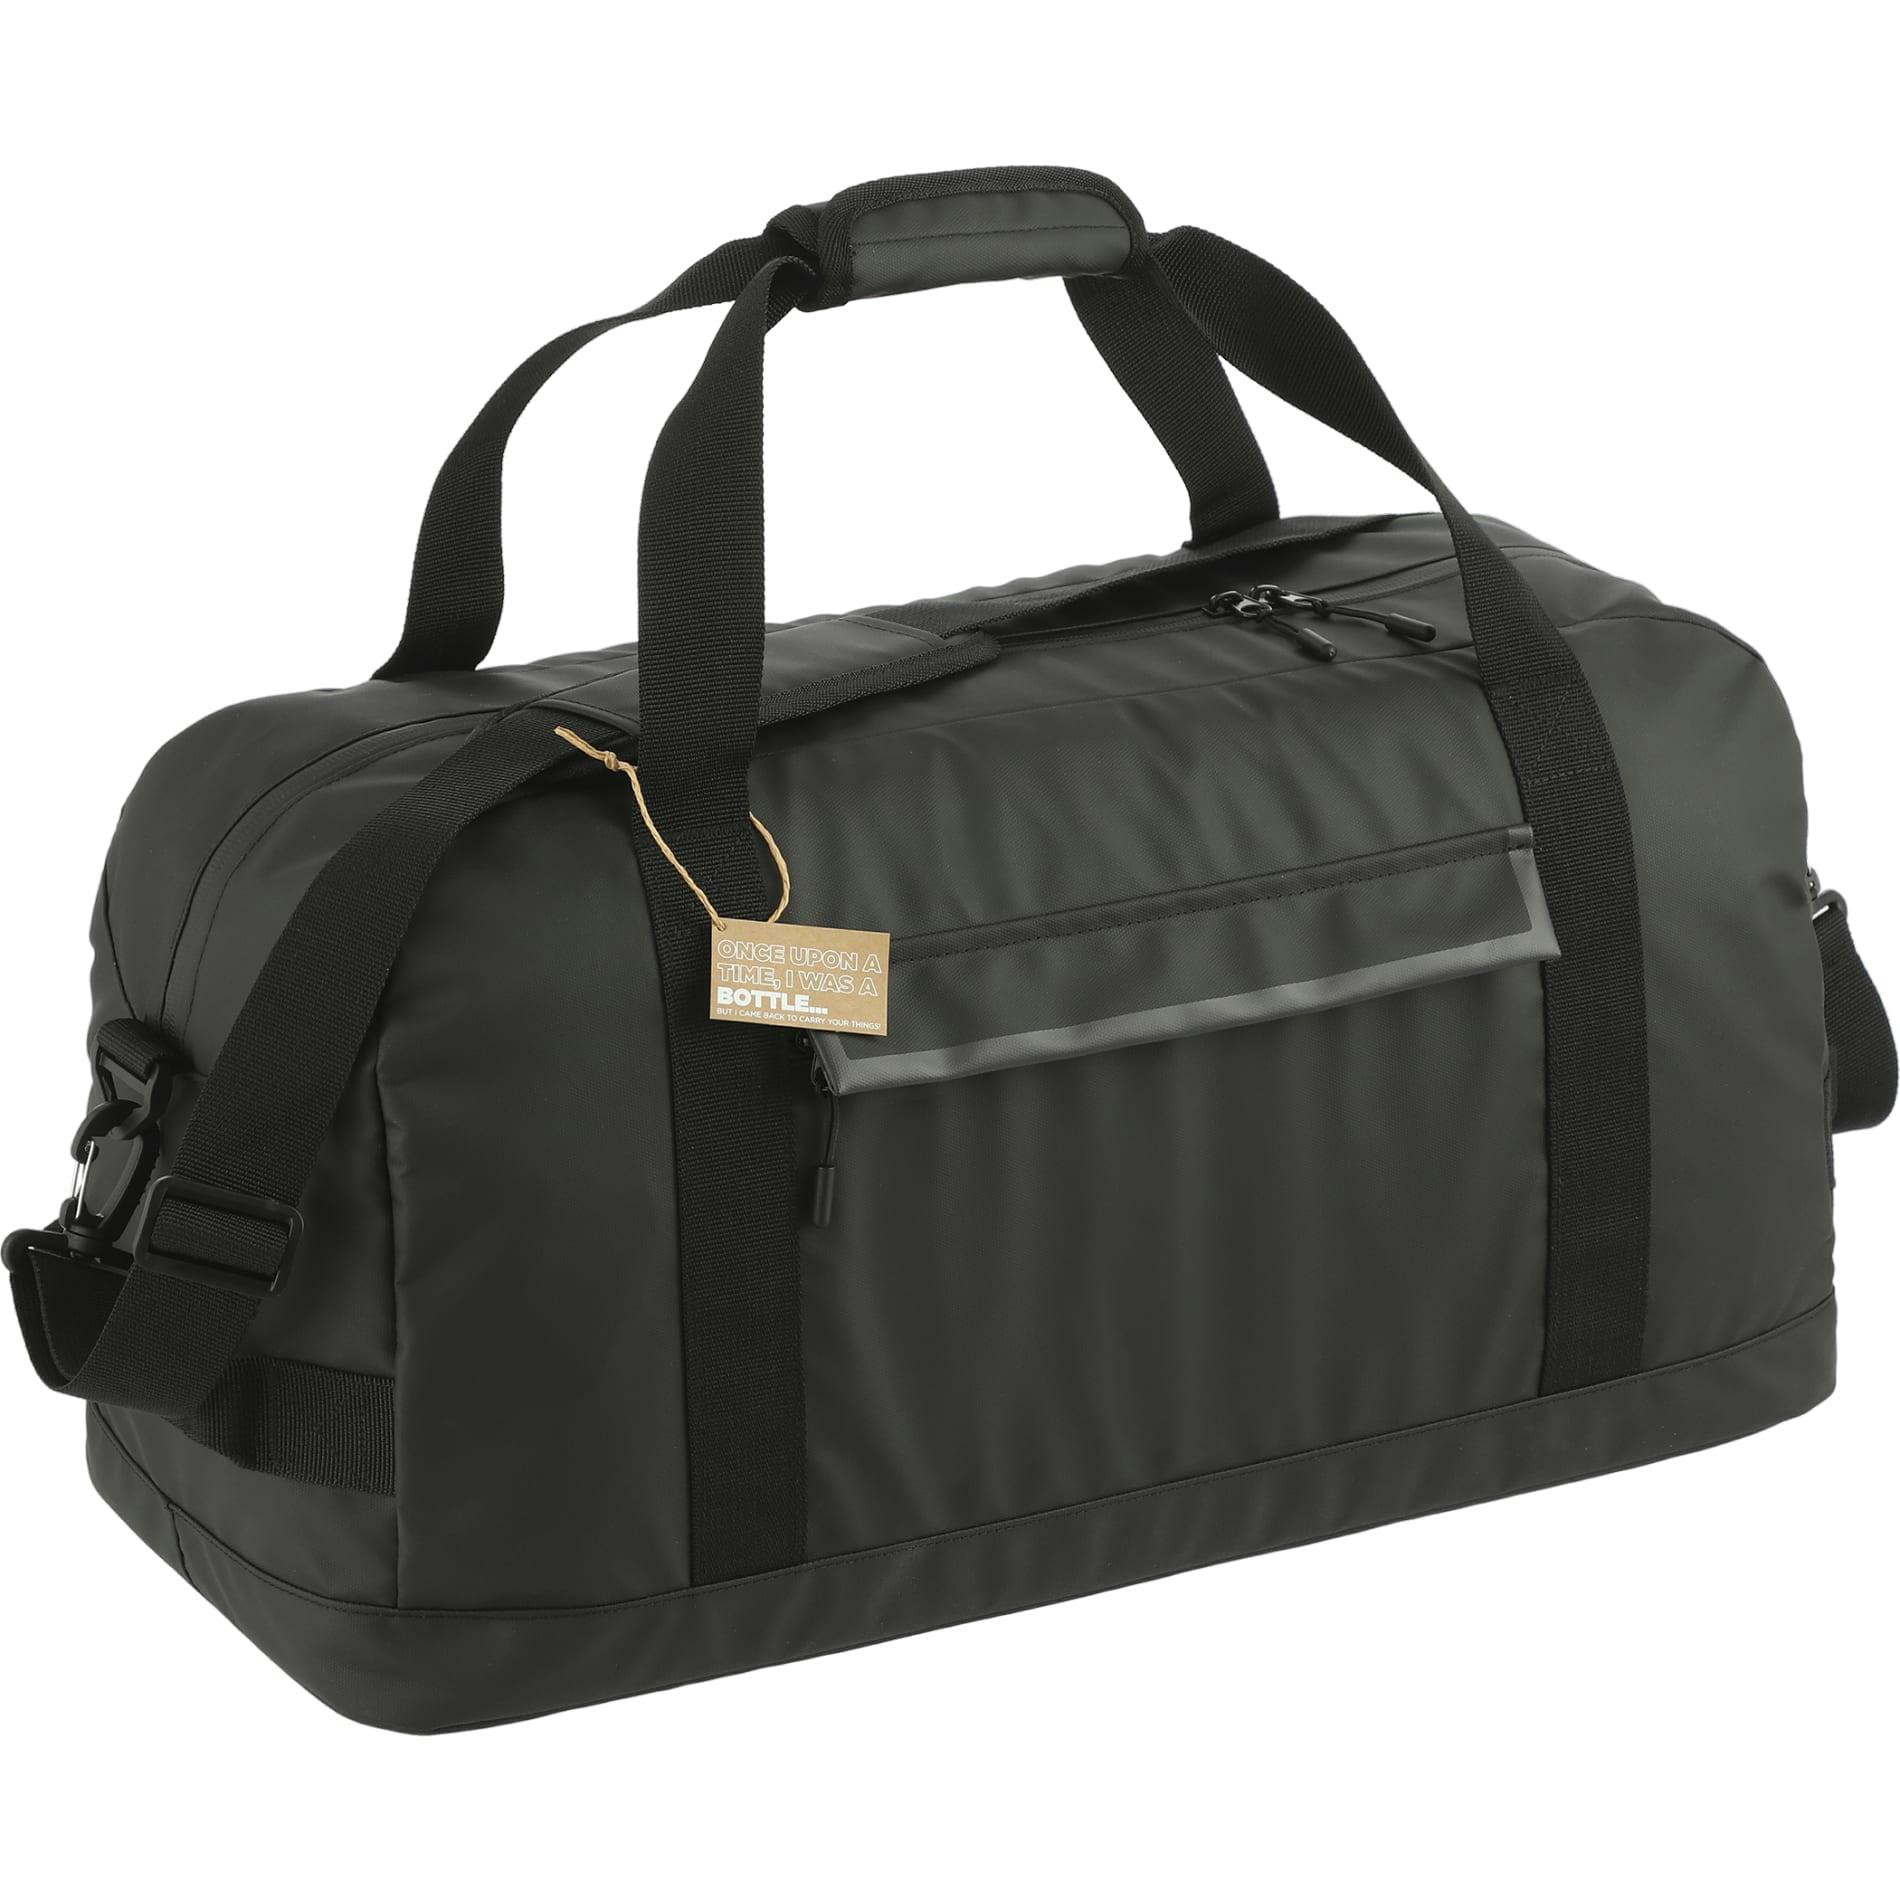 NBN All-Weather Recycled Duffel - additional Image 3